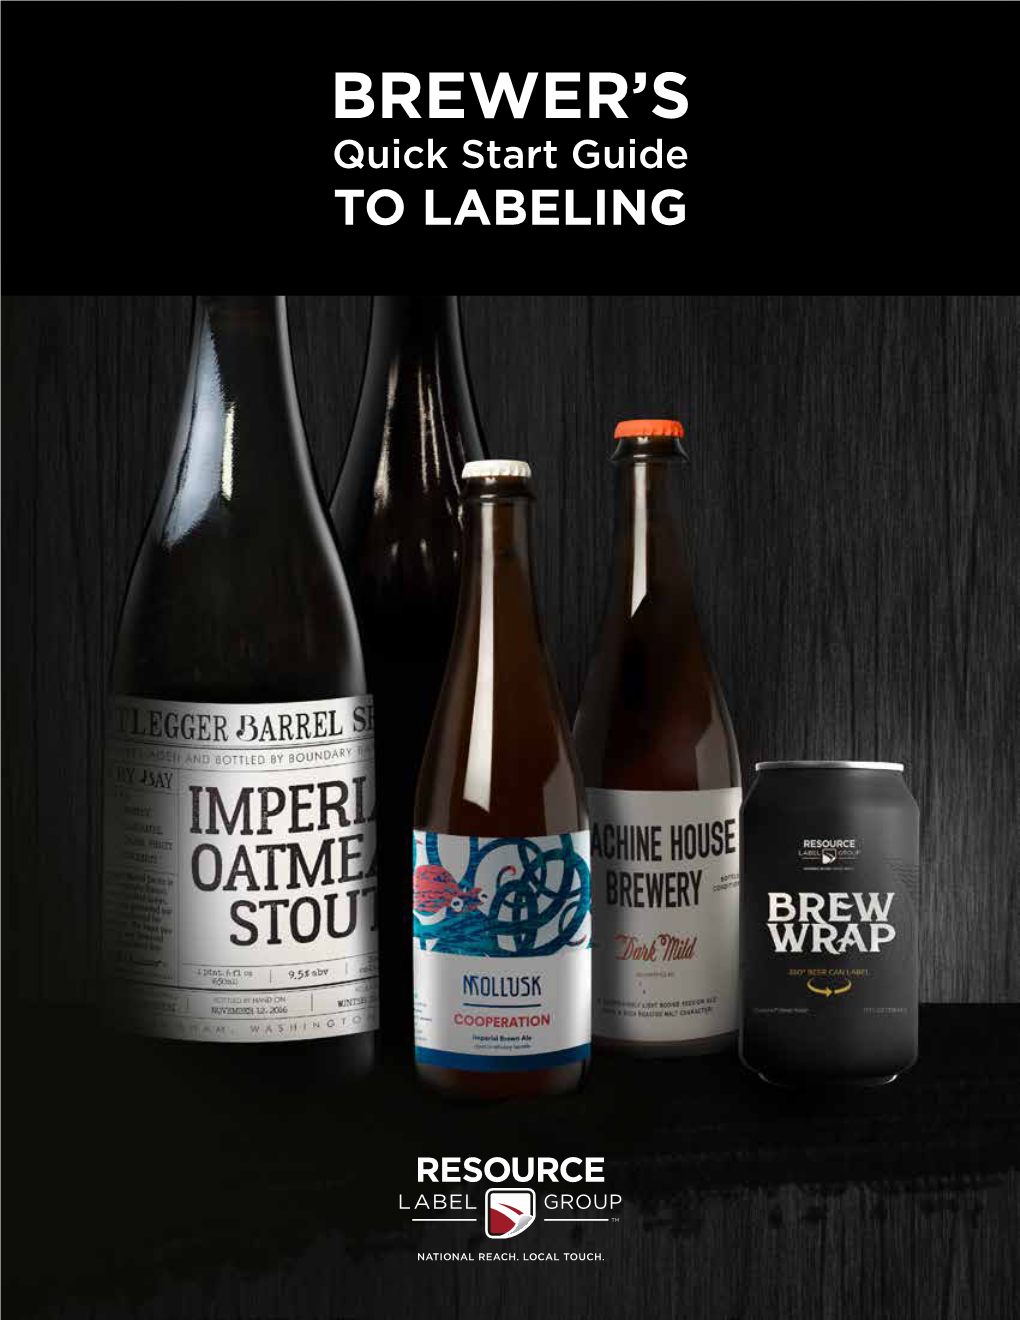 Brewer's Quick Start Guide to Labeling